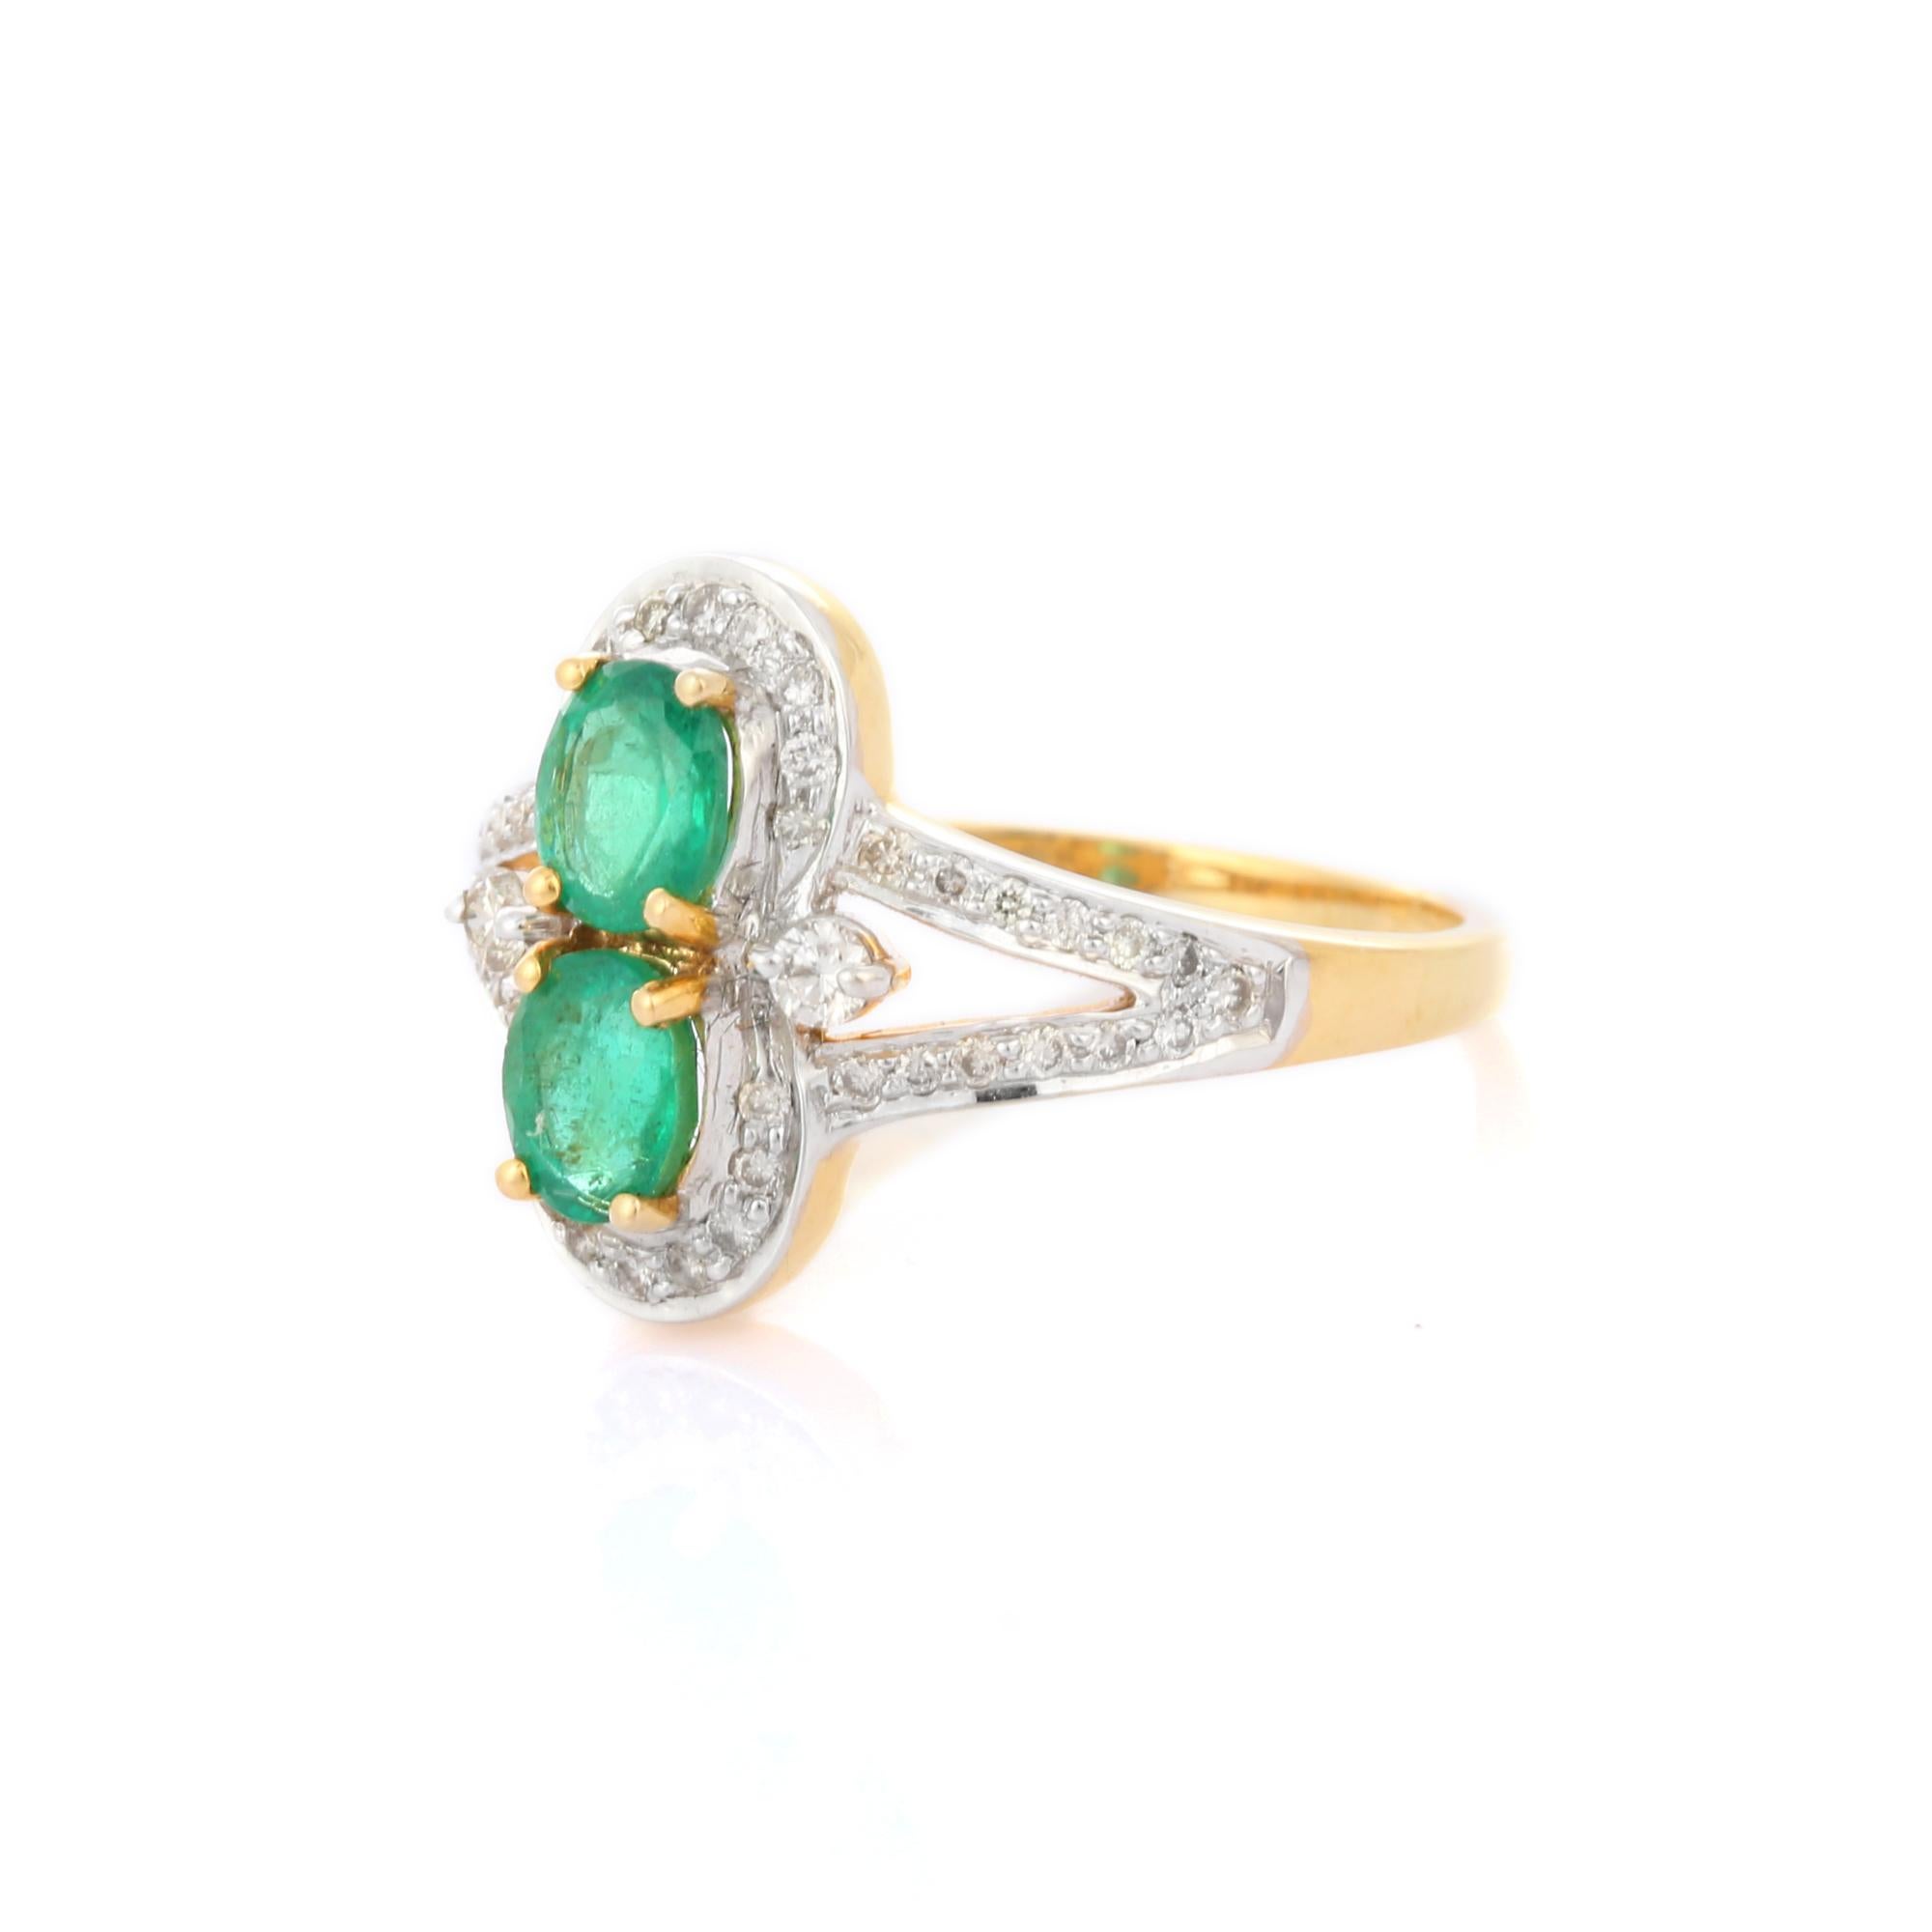 For Sale:  Magnificent Two Emerald Wedding Ring with Halo Diamonds in 18K Yellow Gold  2